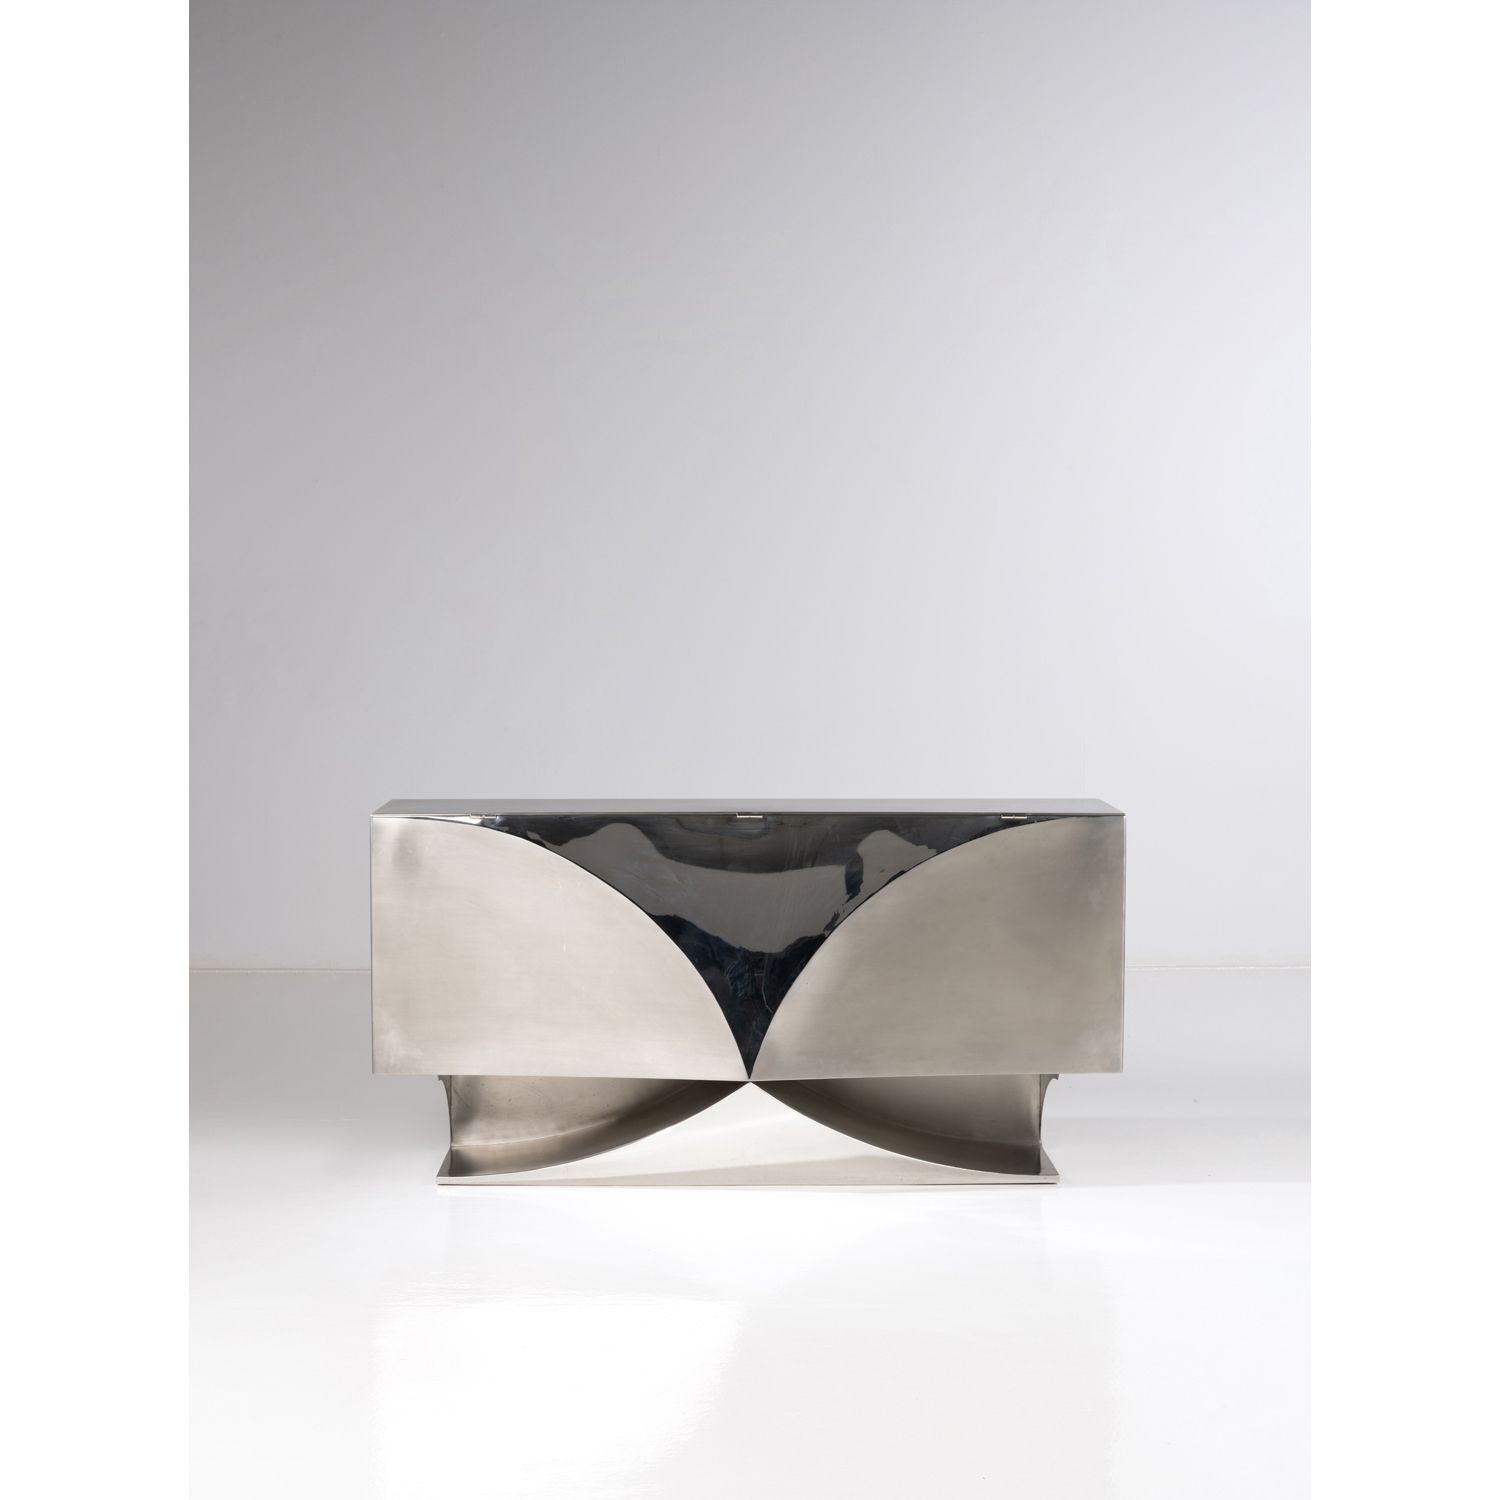 Null Maurice Marty (20th c.-21st c.)

Sideboard - Unique piece

Stainless steel
&hellip;